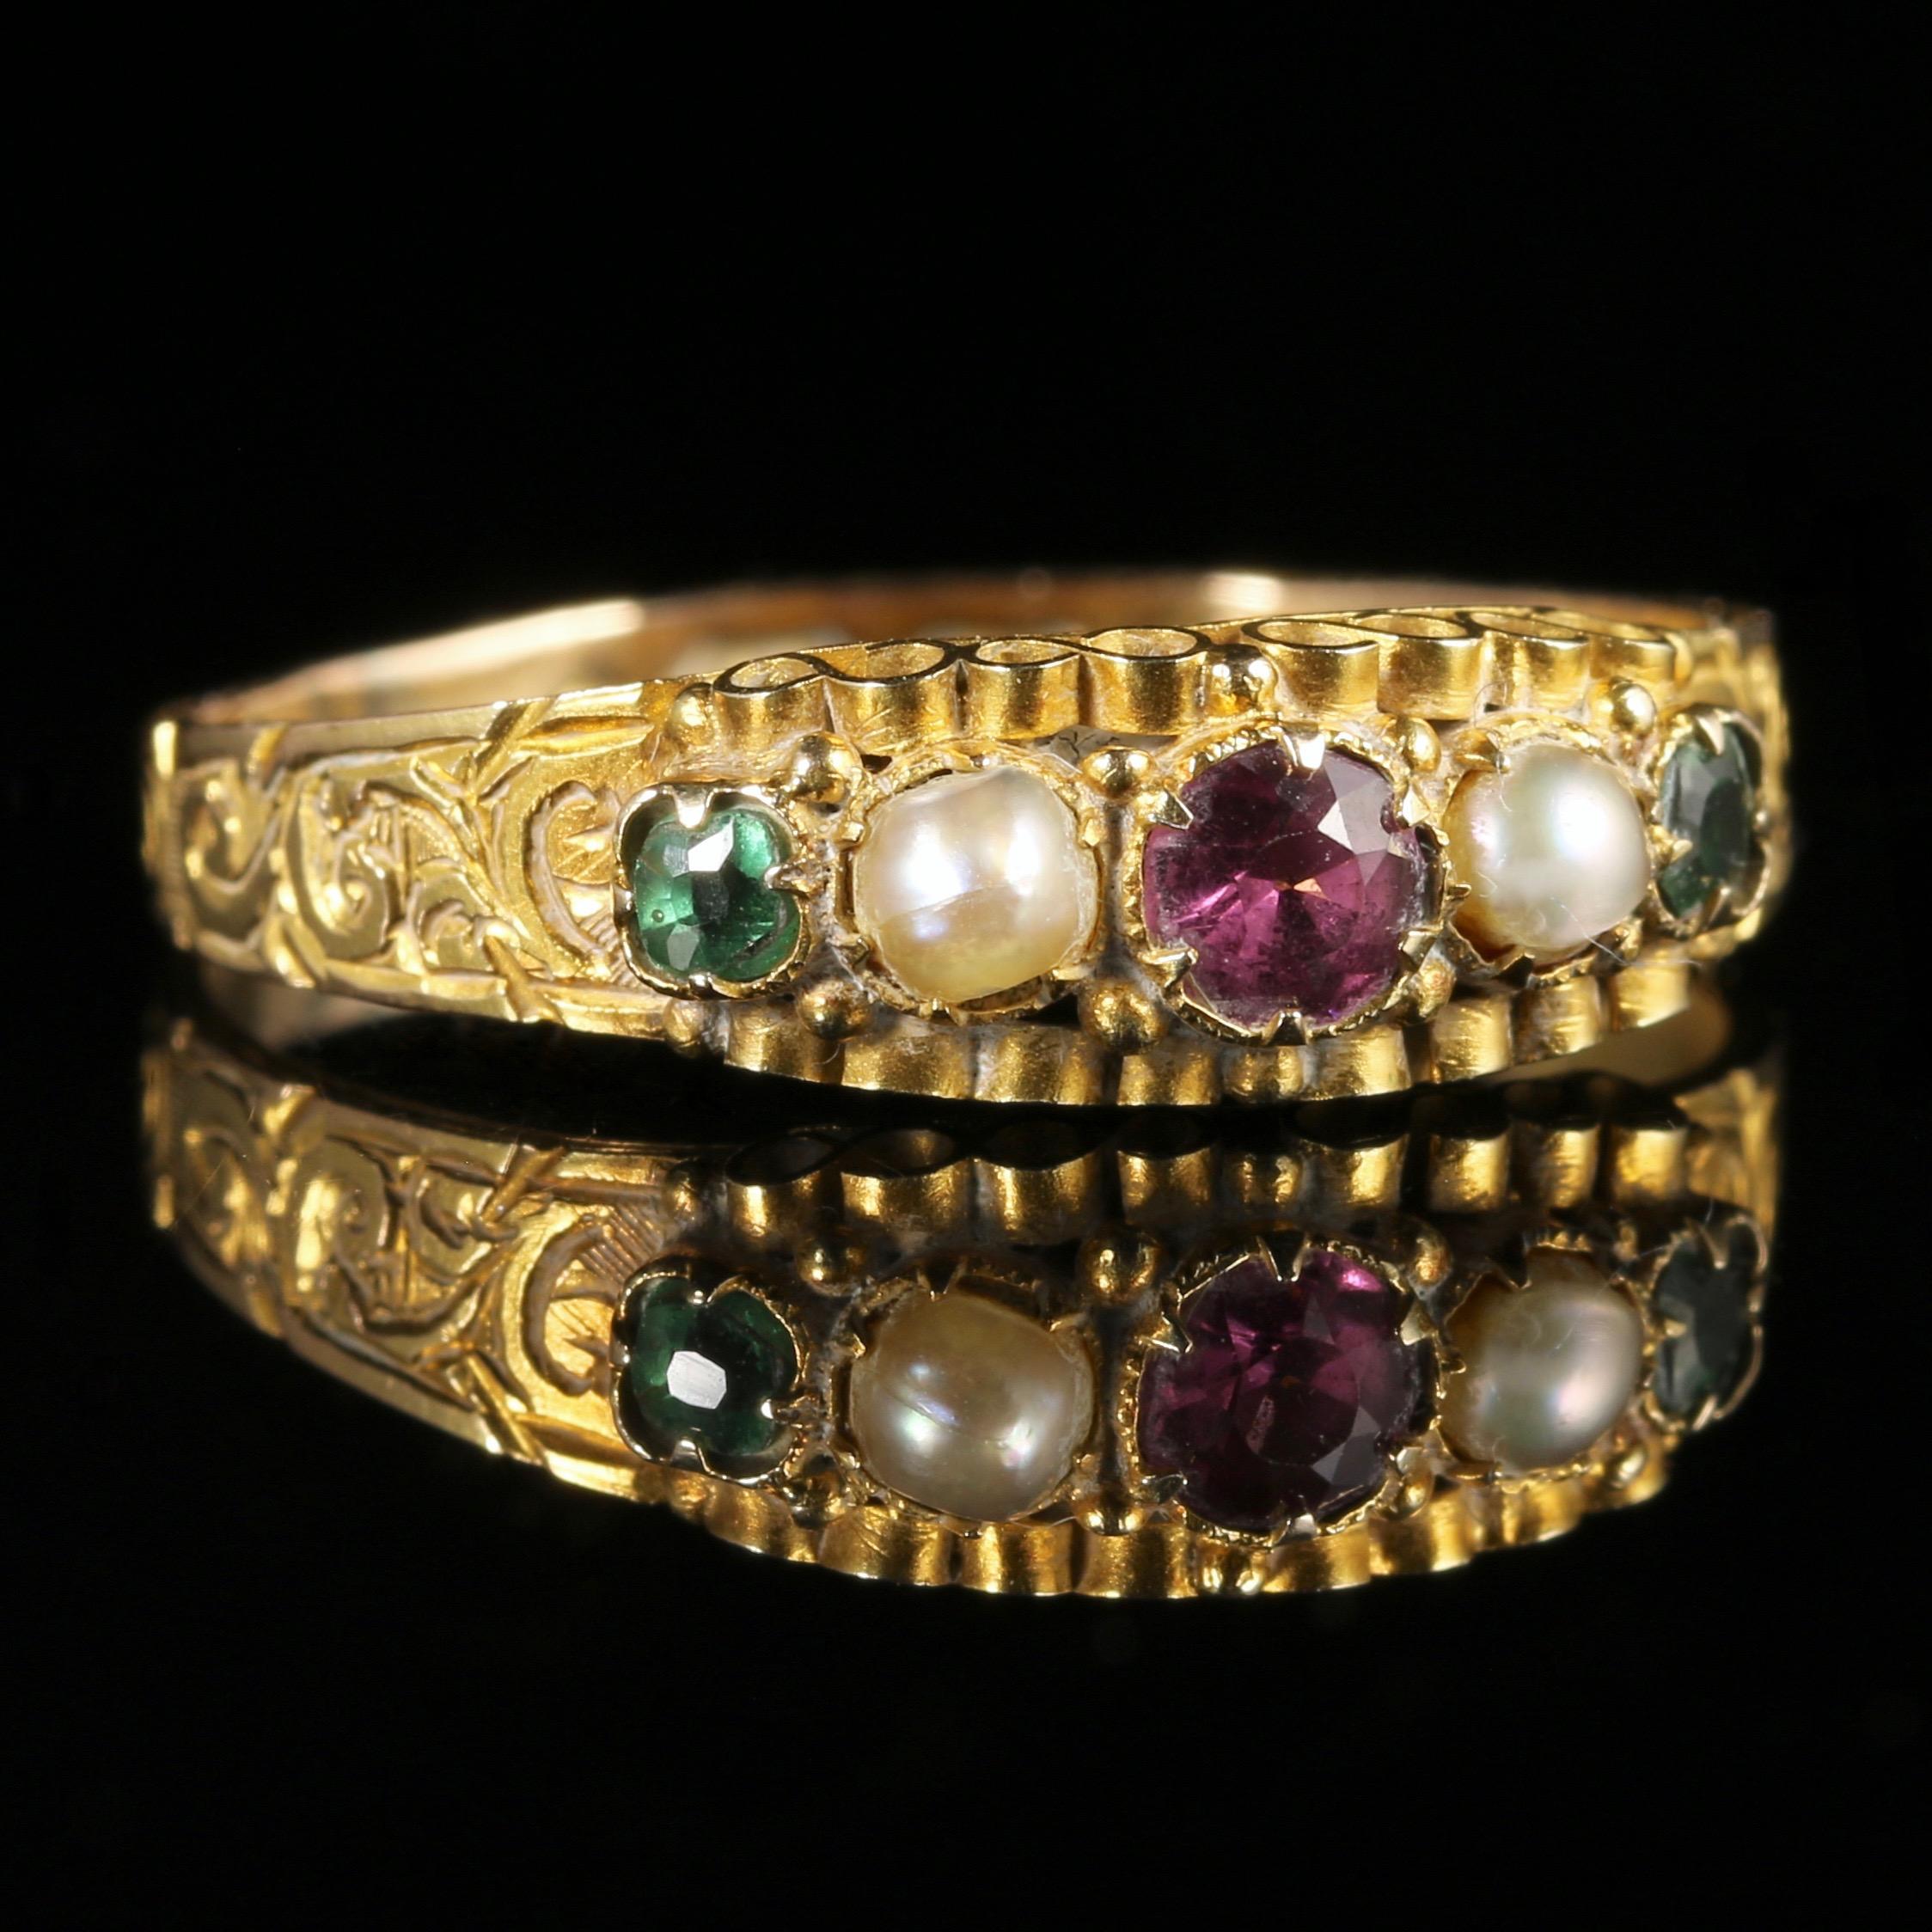 Women's Antique Victorian Amethyst Emerald Pearl Ring Dated 1867 12 Carat Gold